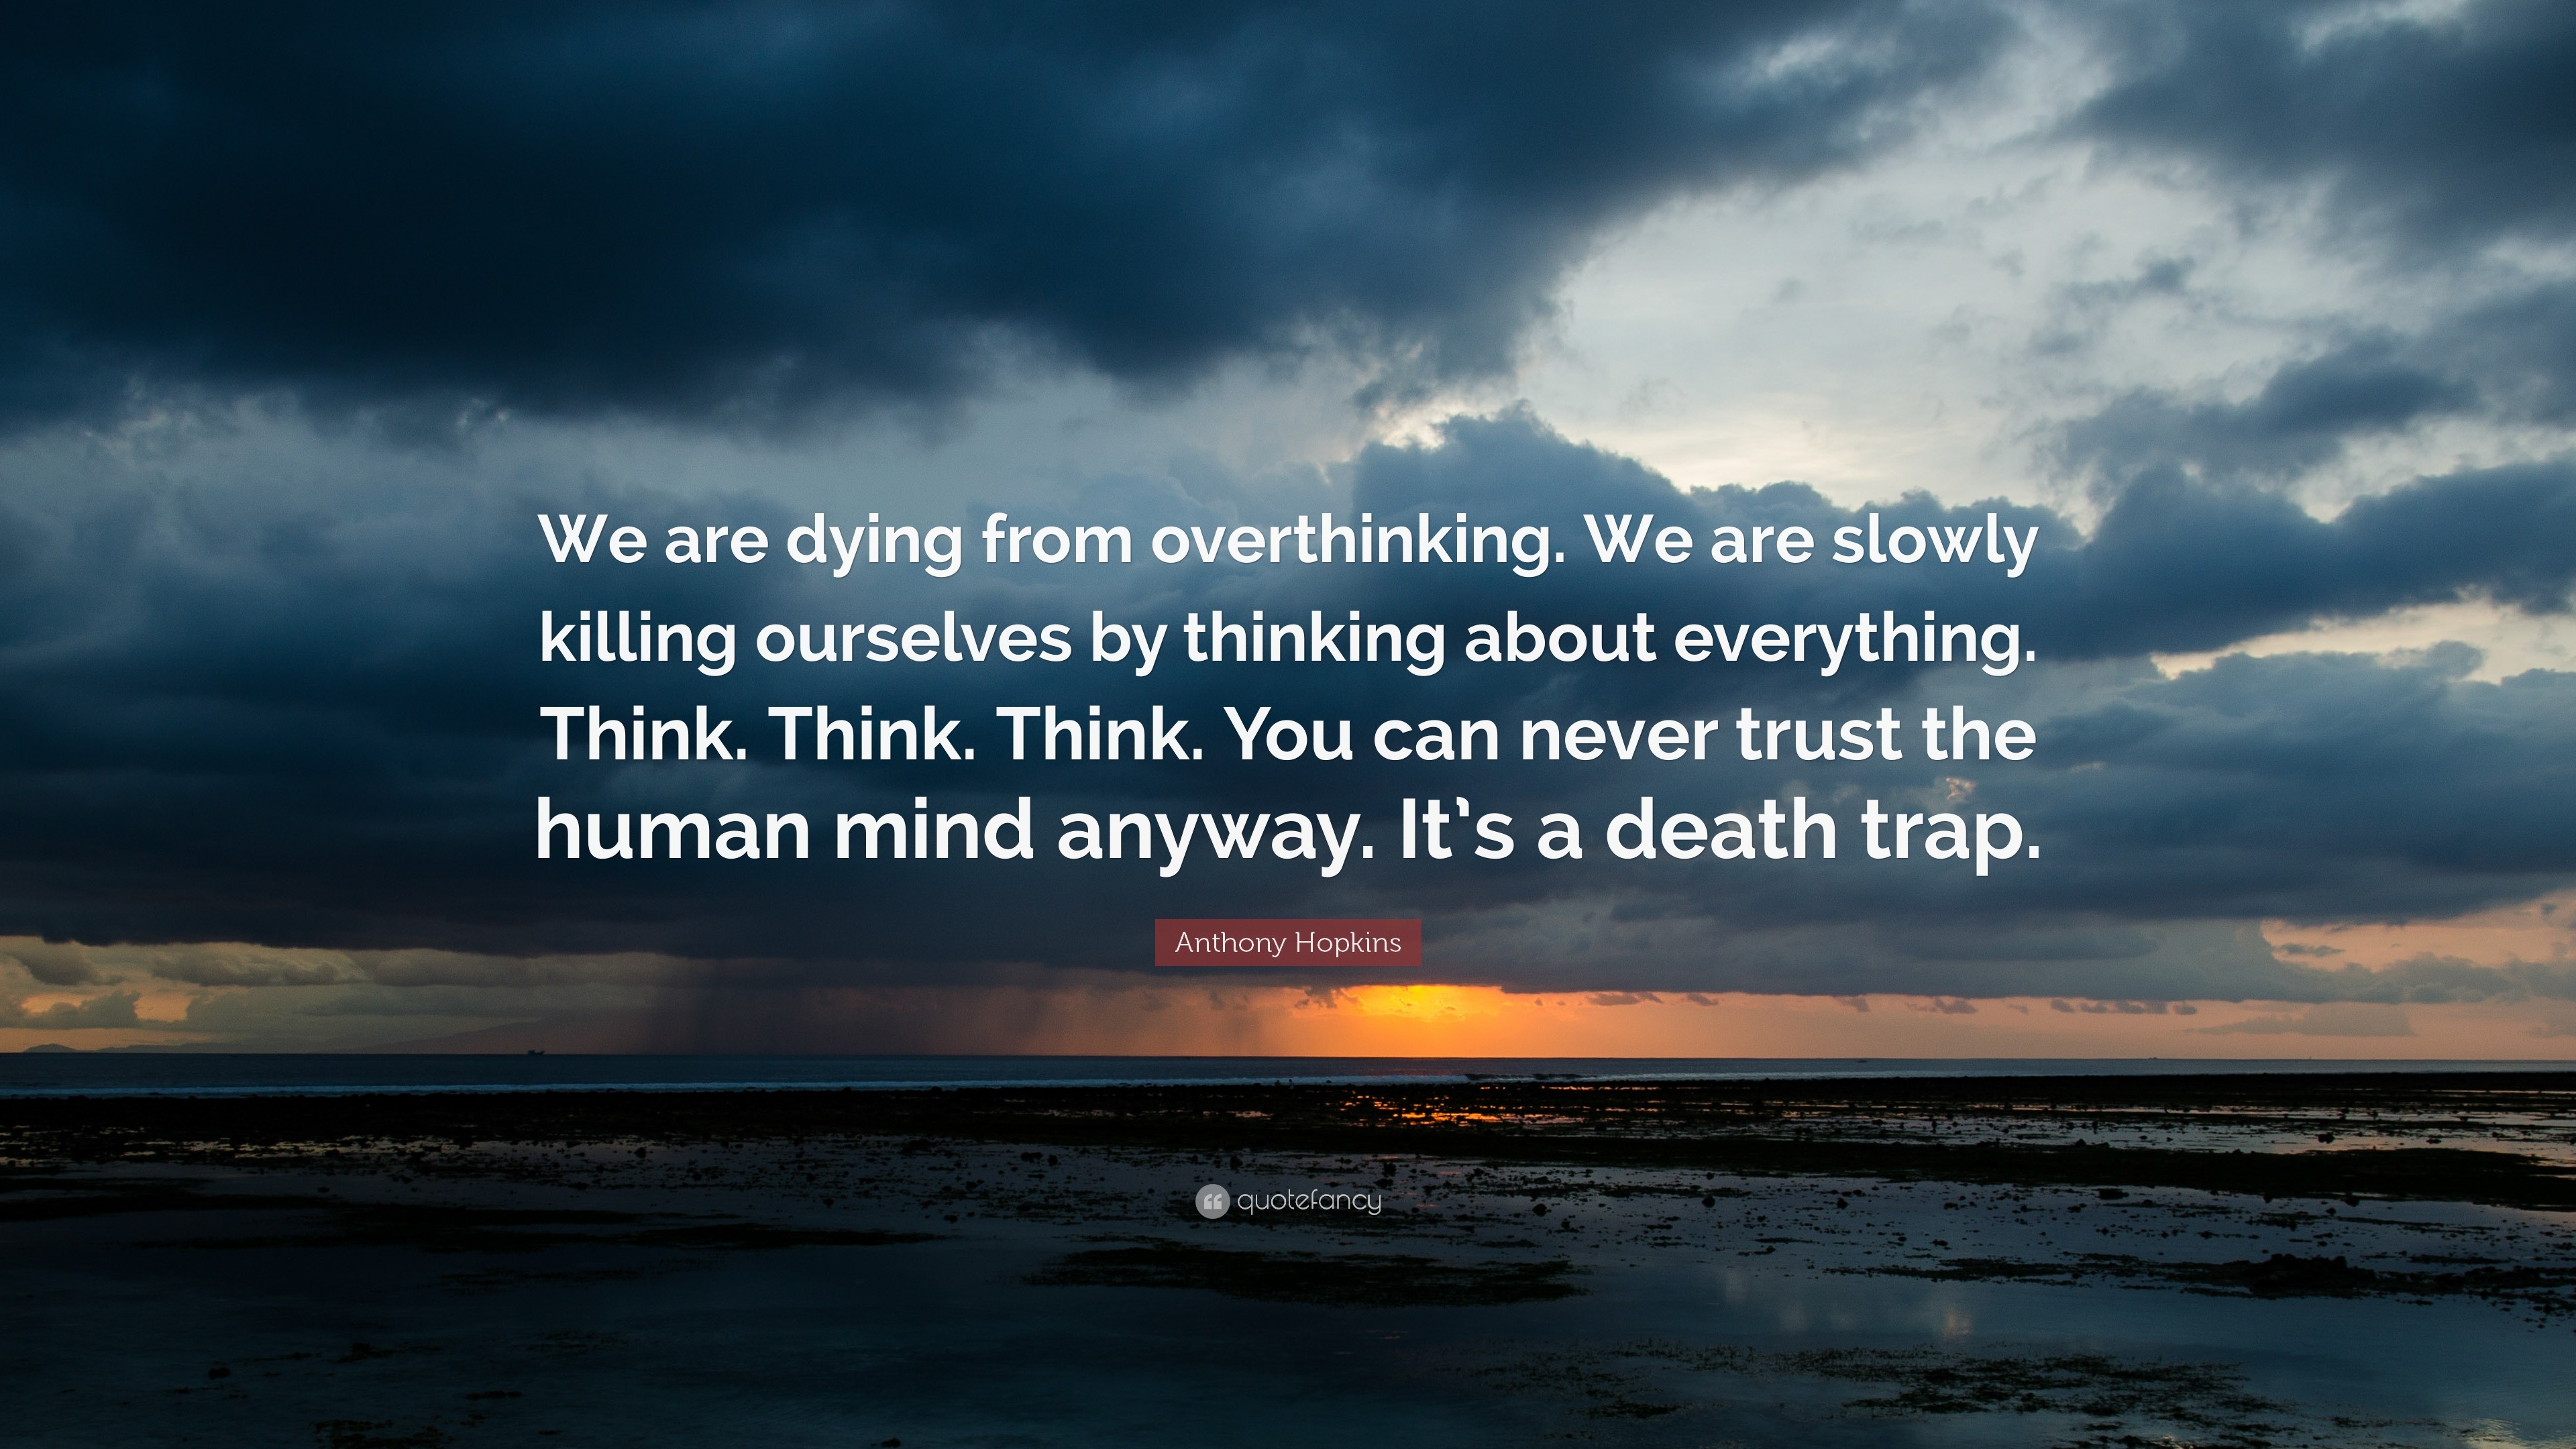 Anthony Hopkins Quote: “We are dying from overthinking. We are slowly